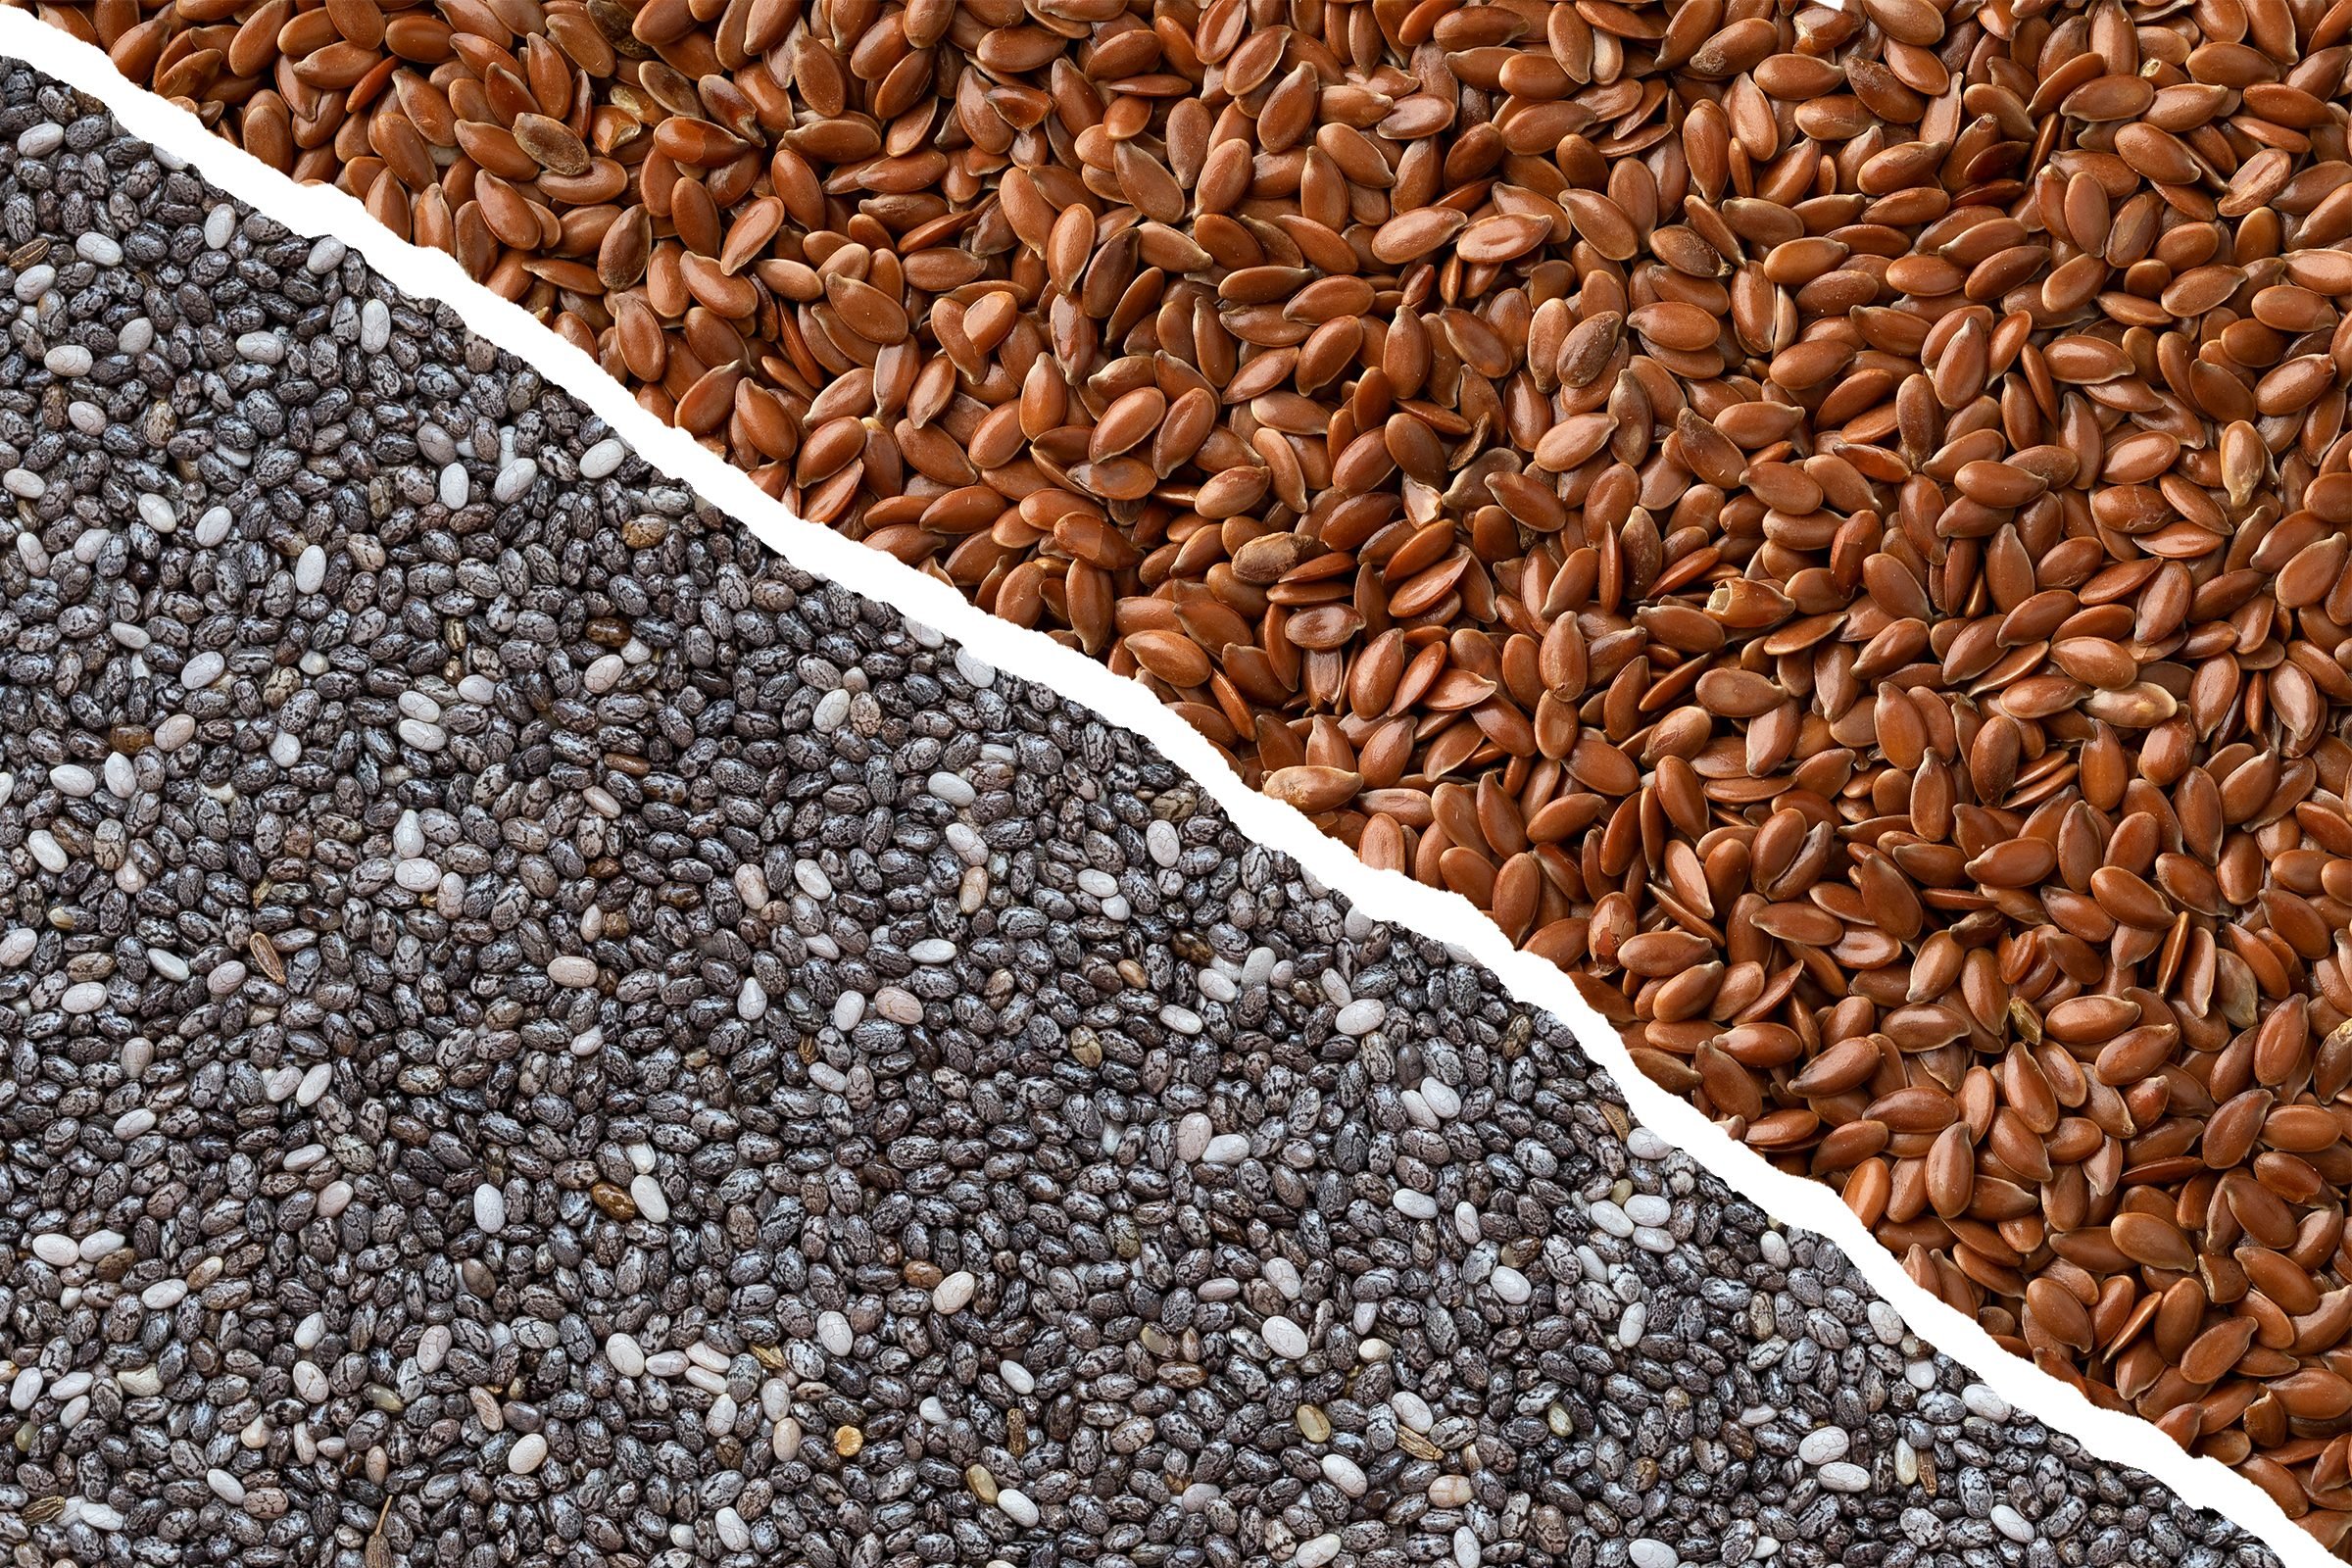 Chia Seeds vs. Flaxseeds: What's the Difference?